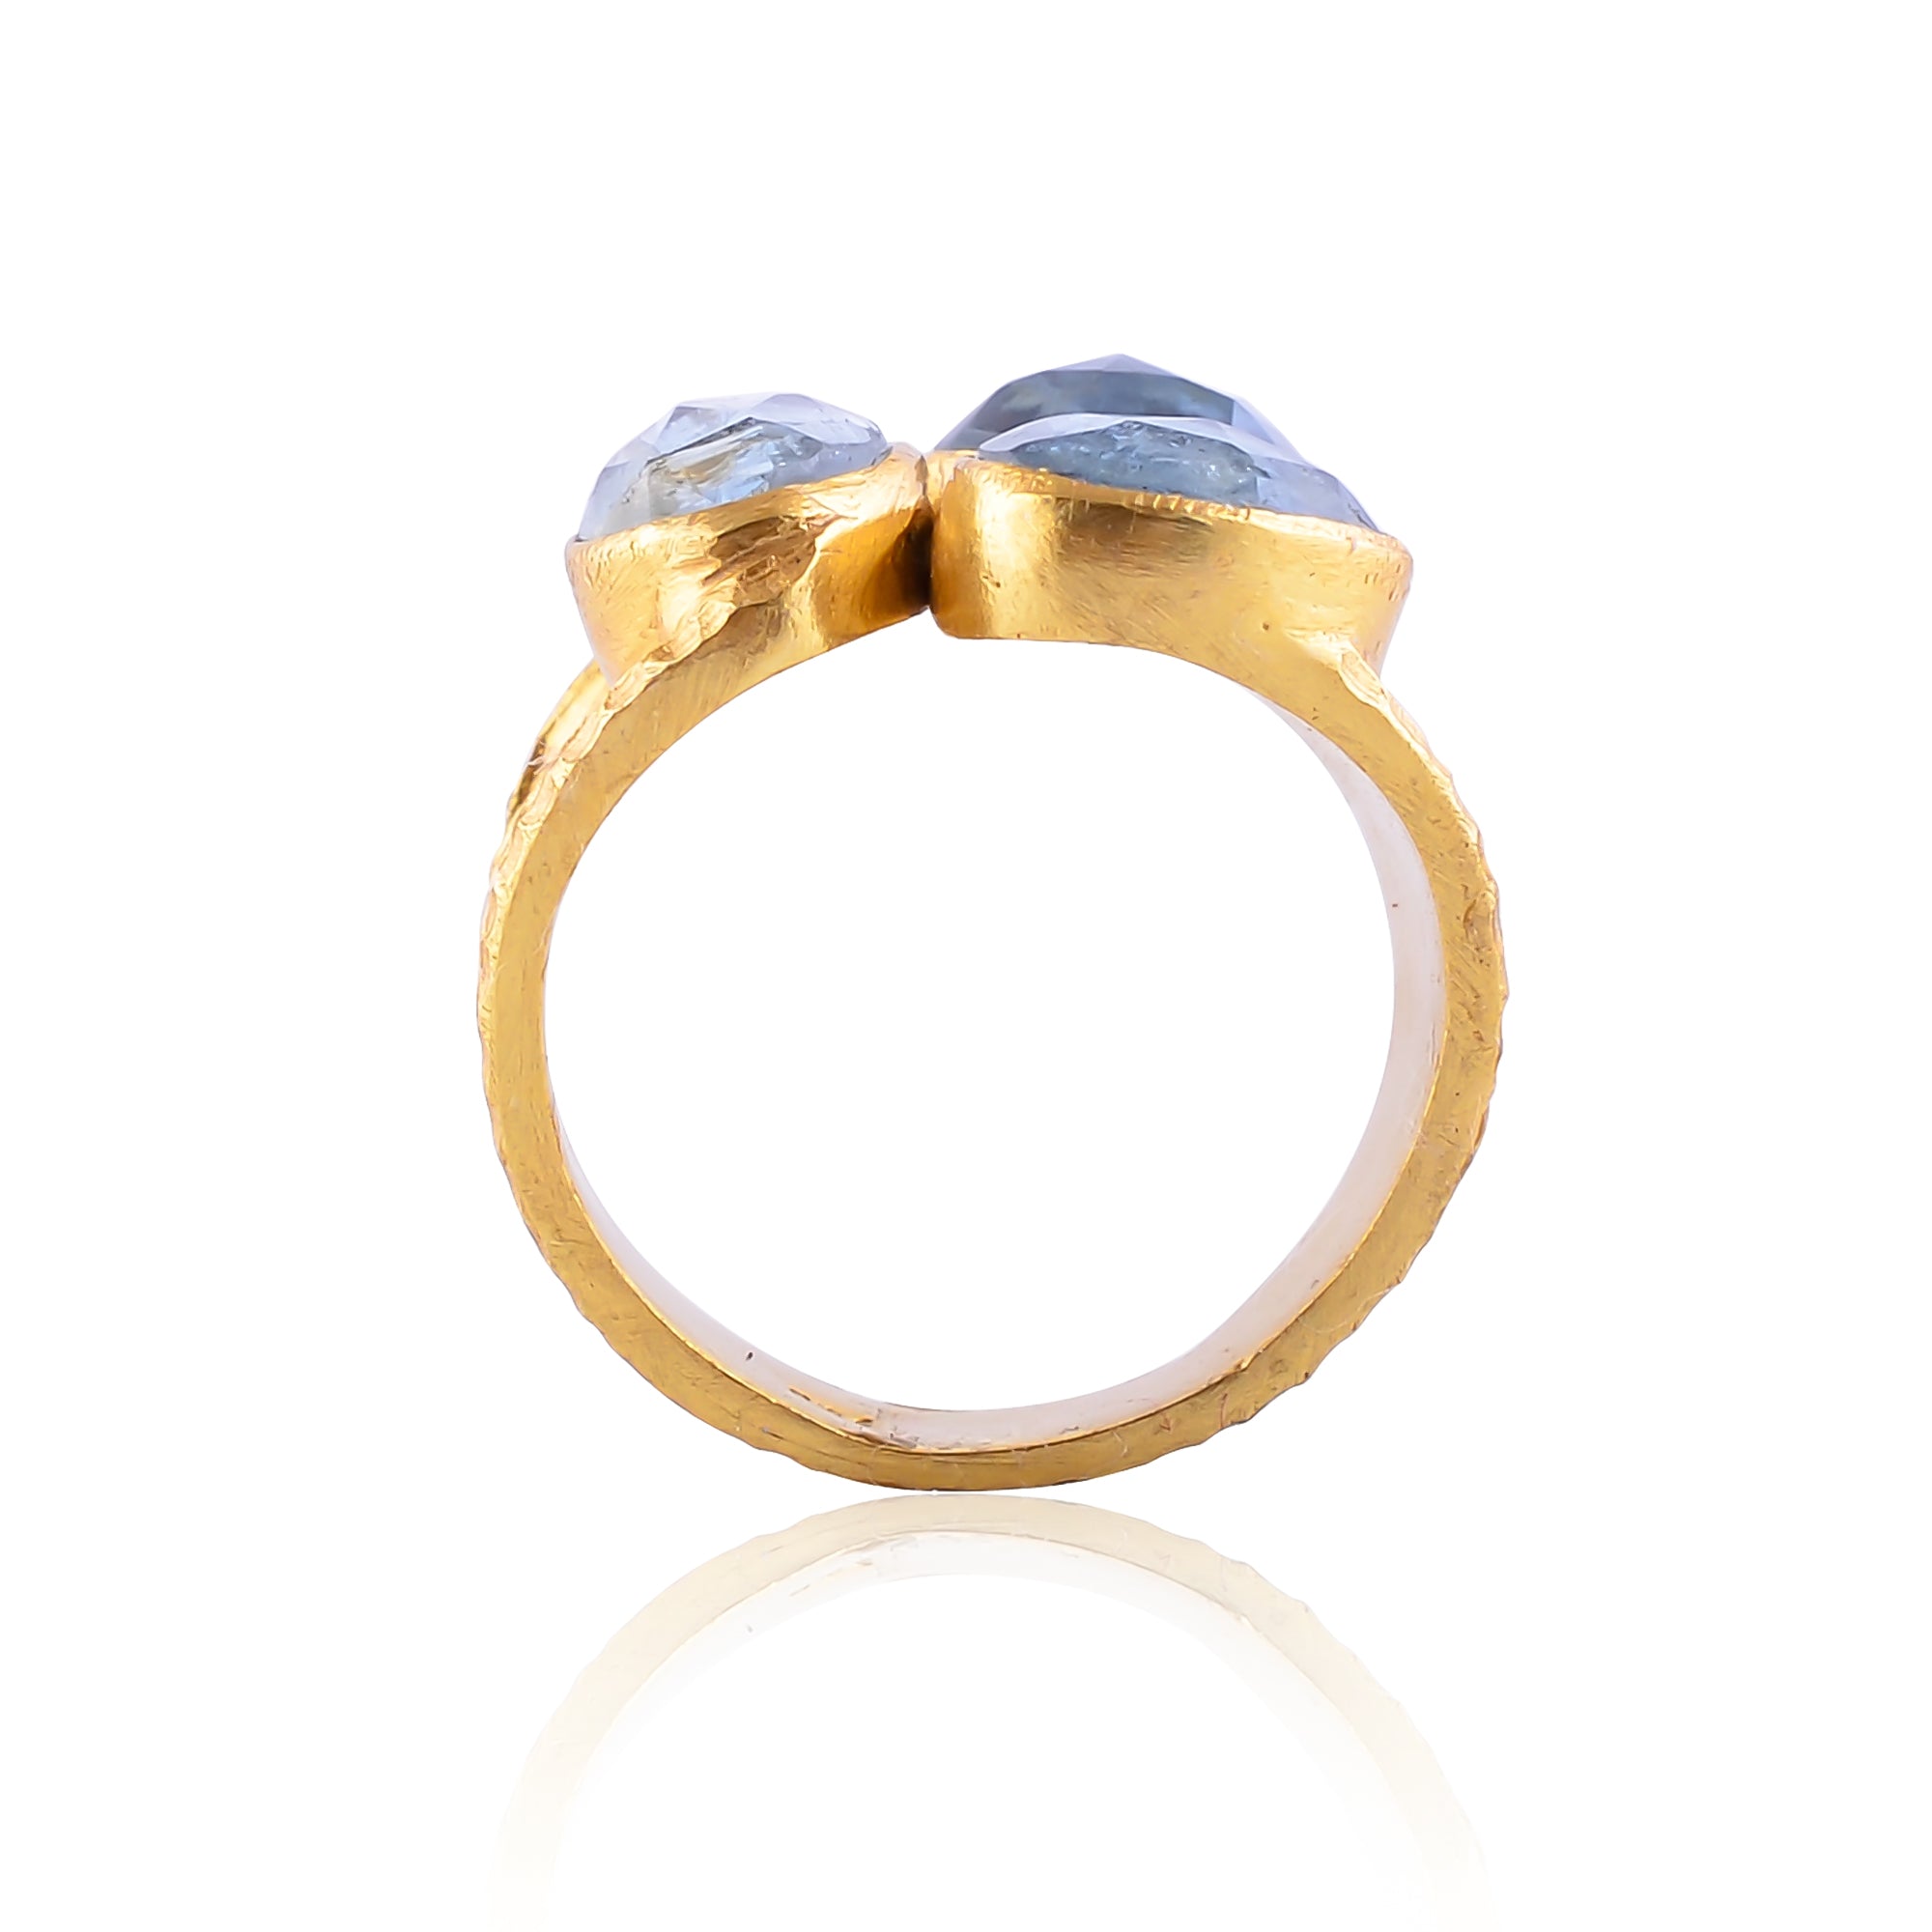 Buy Indian Handcrafted Silver Gold Plated Aquamarine Ring